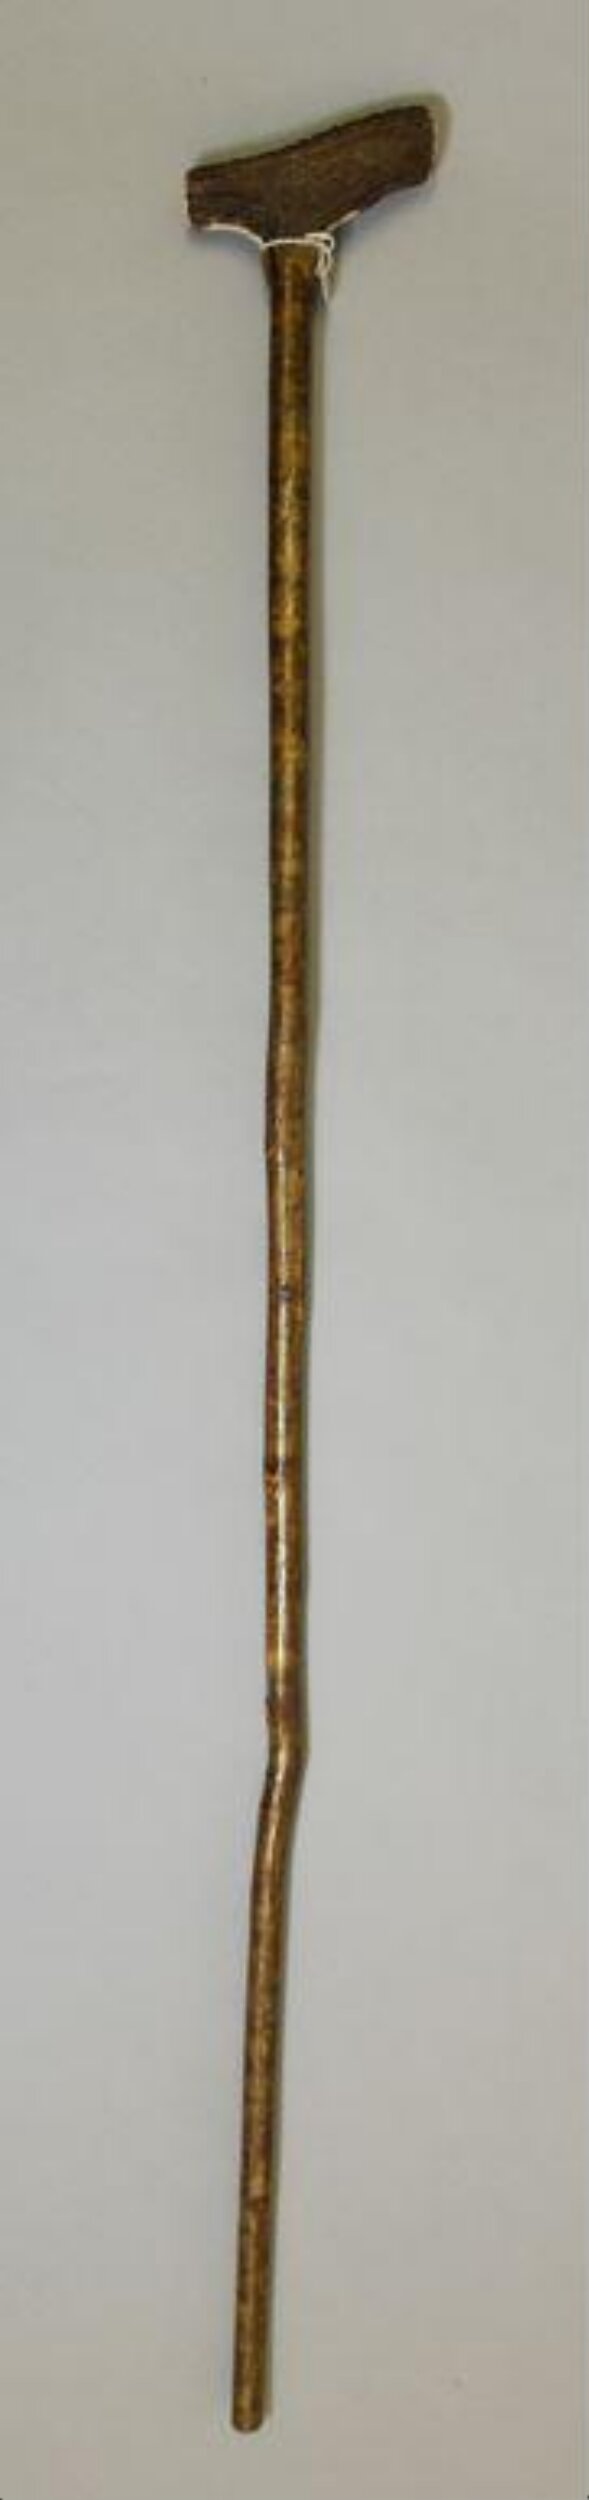 Walking stick used on stage by Campbell Singer top image